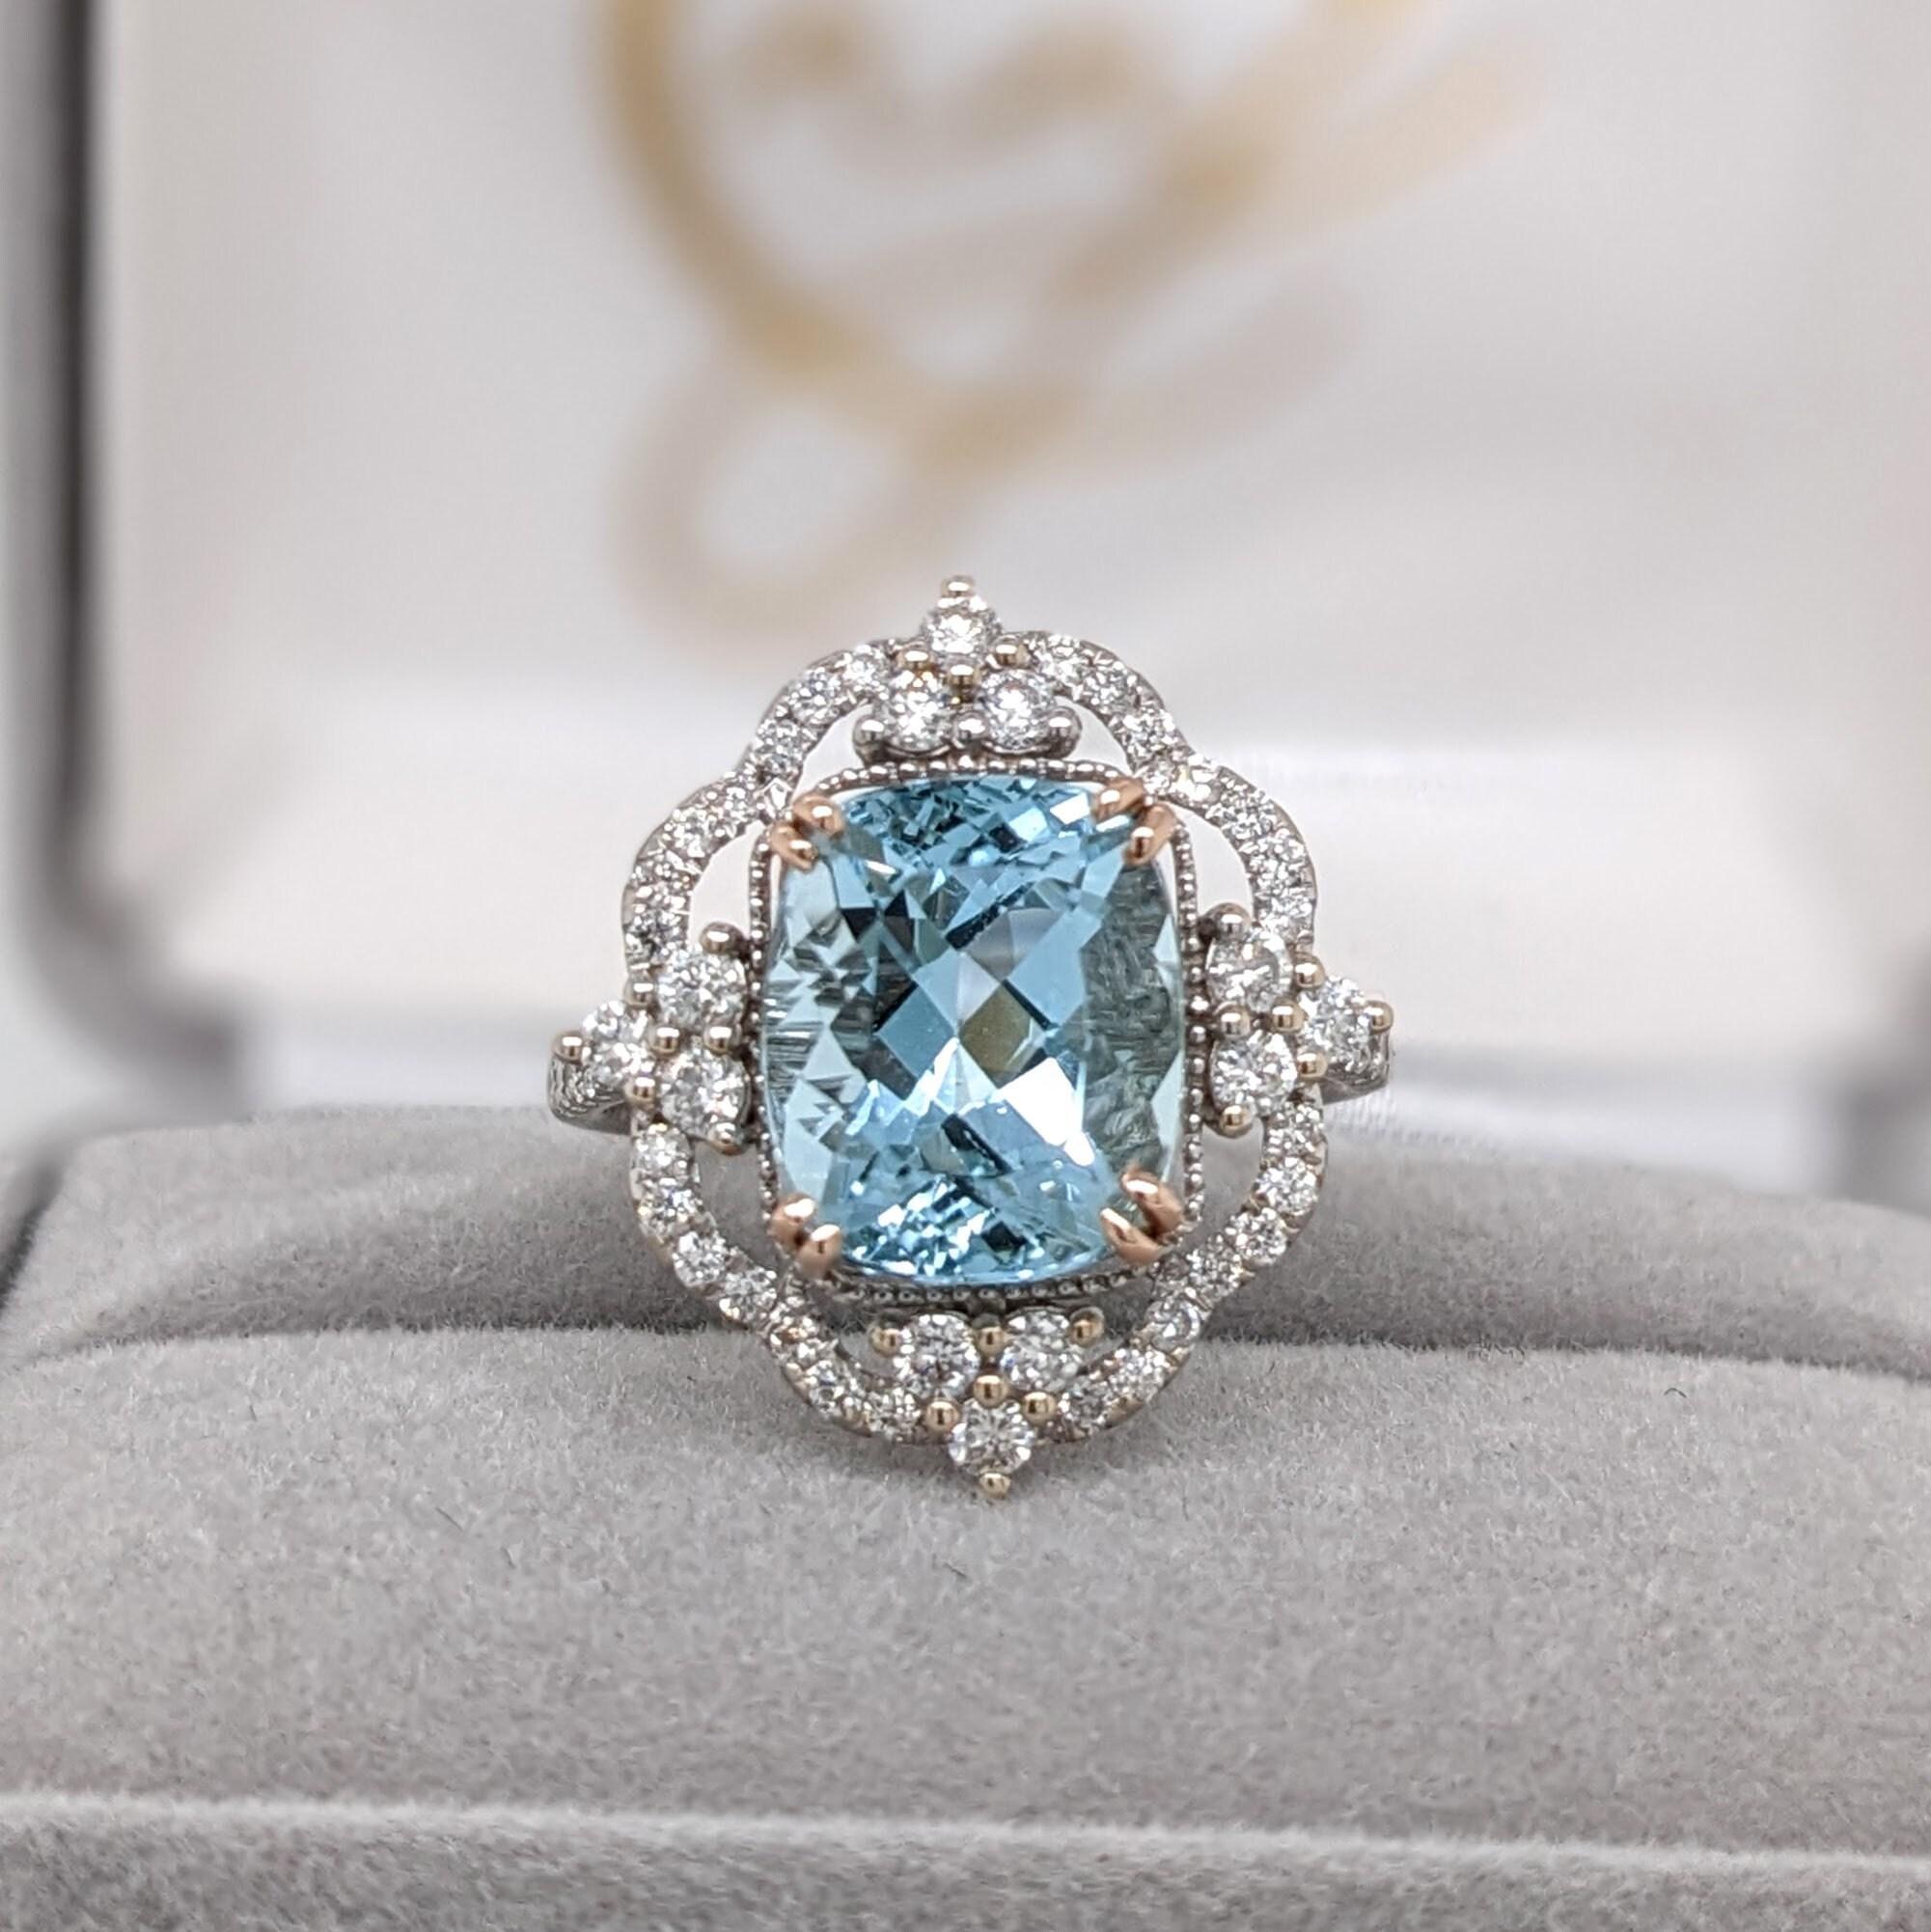 This beautiful ring features a cushion cut sparkling Aquamarine in 14k dual tone rose and white gold with a gorgeous design of halo  round natural diamond accents. A statement ring design perfect for an eye catching engagement or anniversary. This